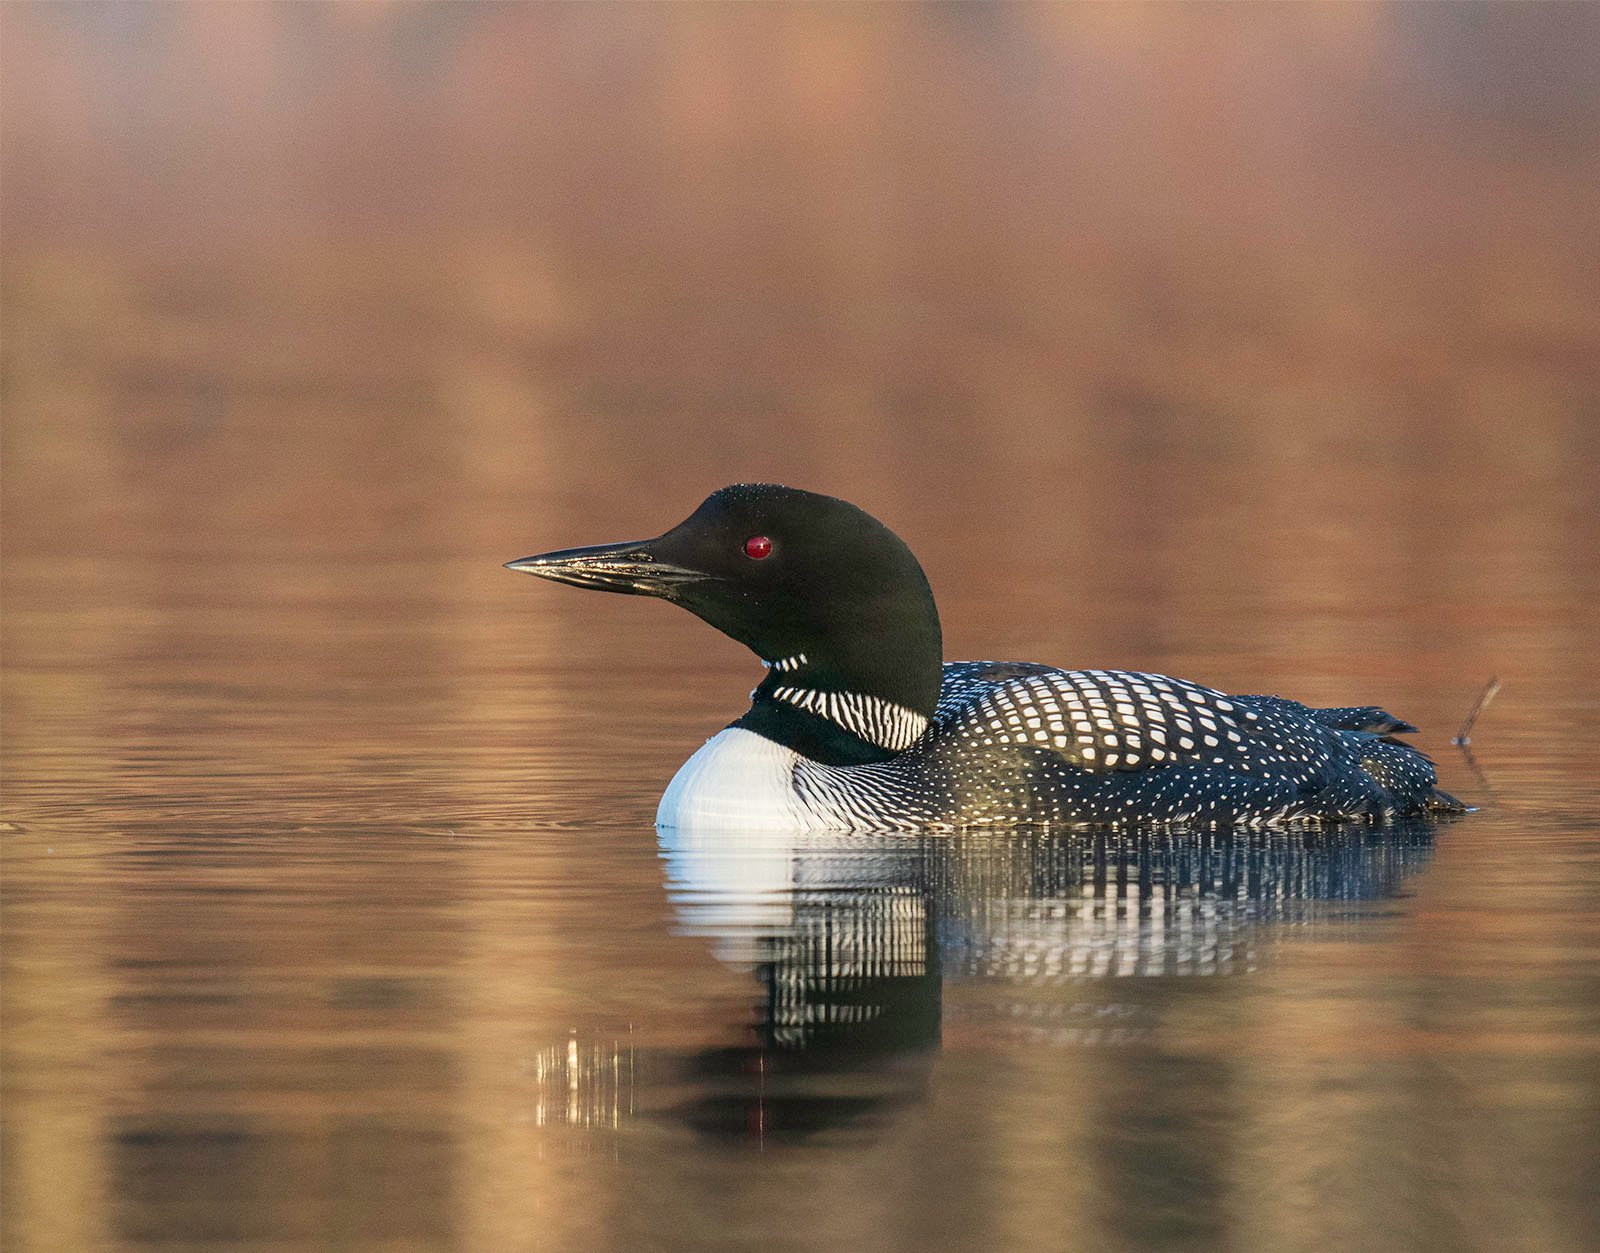 A common loon with striking black-and-white plumage, its red eyes standing out, swims on a tranquil golden lake.